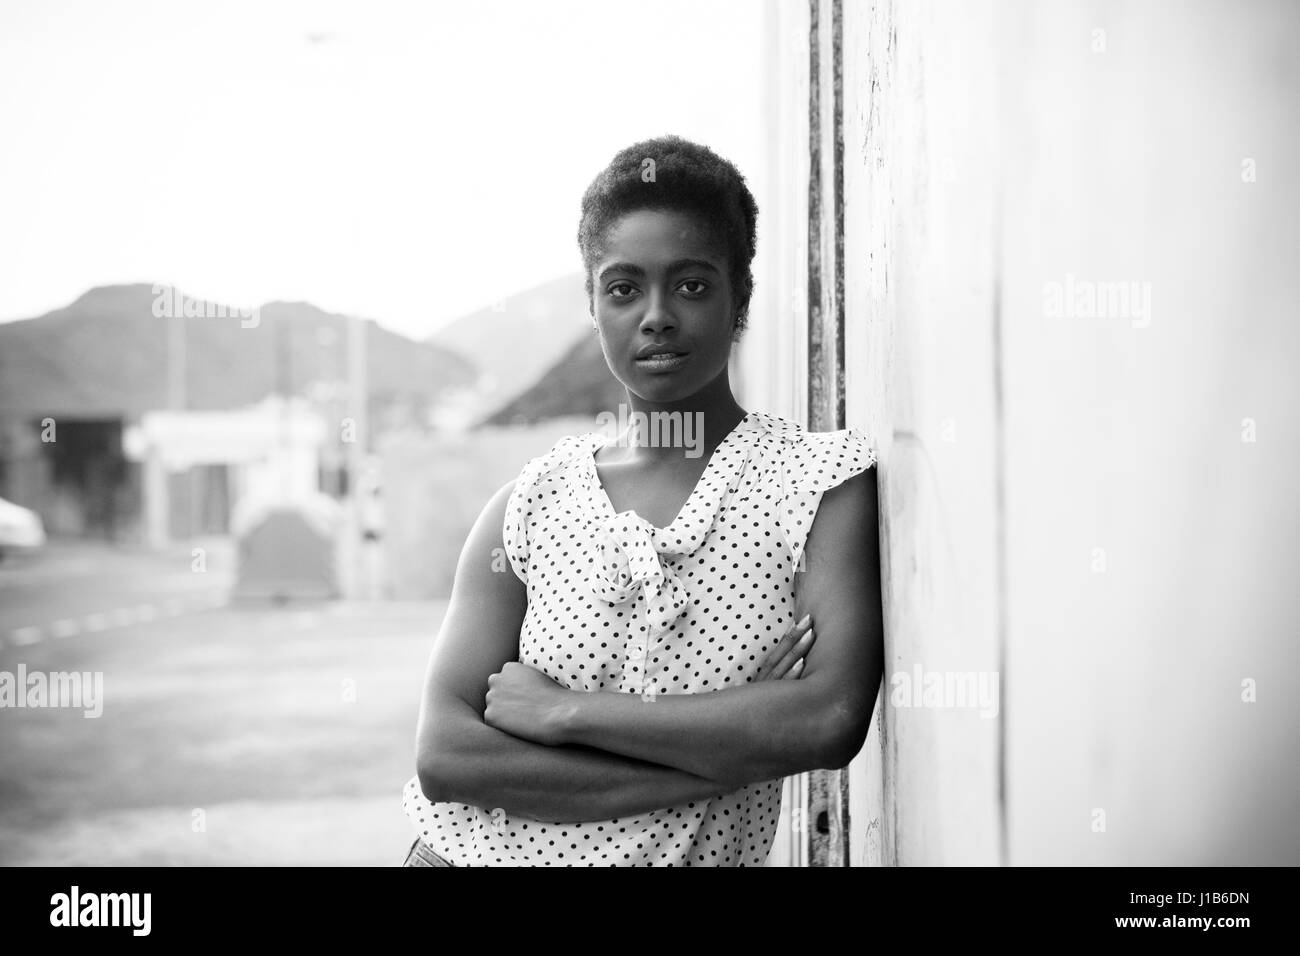 Serious African American woman leaning on wall Stock Photo